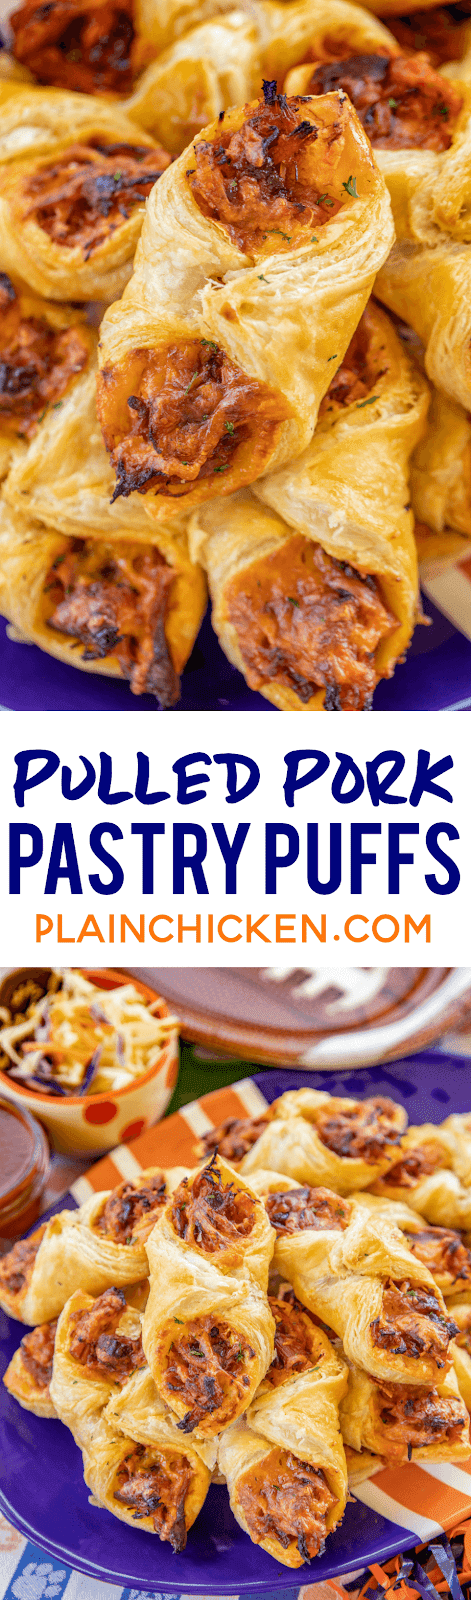 Pulled Pork Pastry Puffs - Football Friday | Plain Chicken®